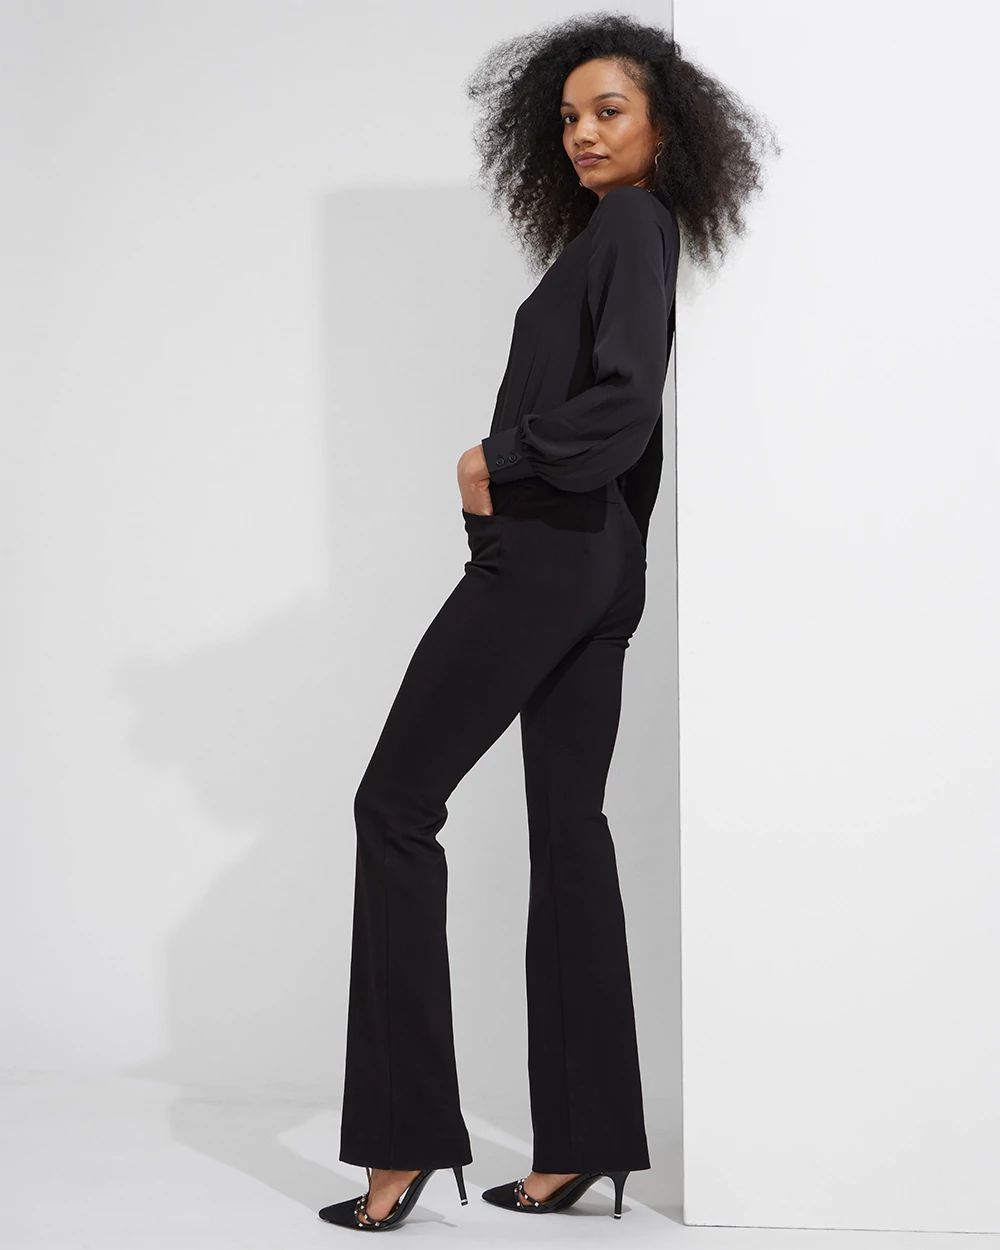 Outlet WHBM Pull-On Skinny Flare Pants click to view larger image.